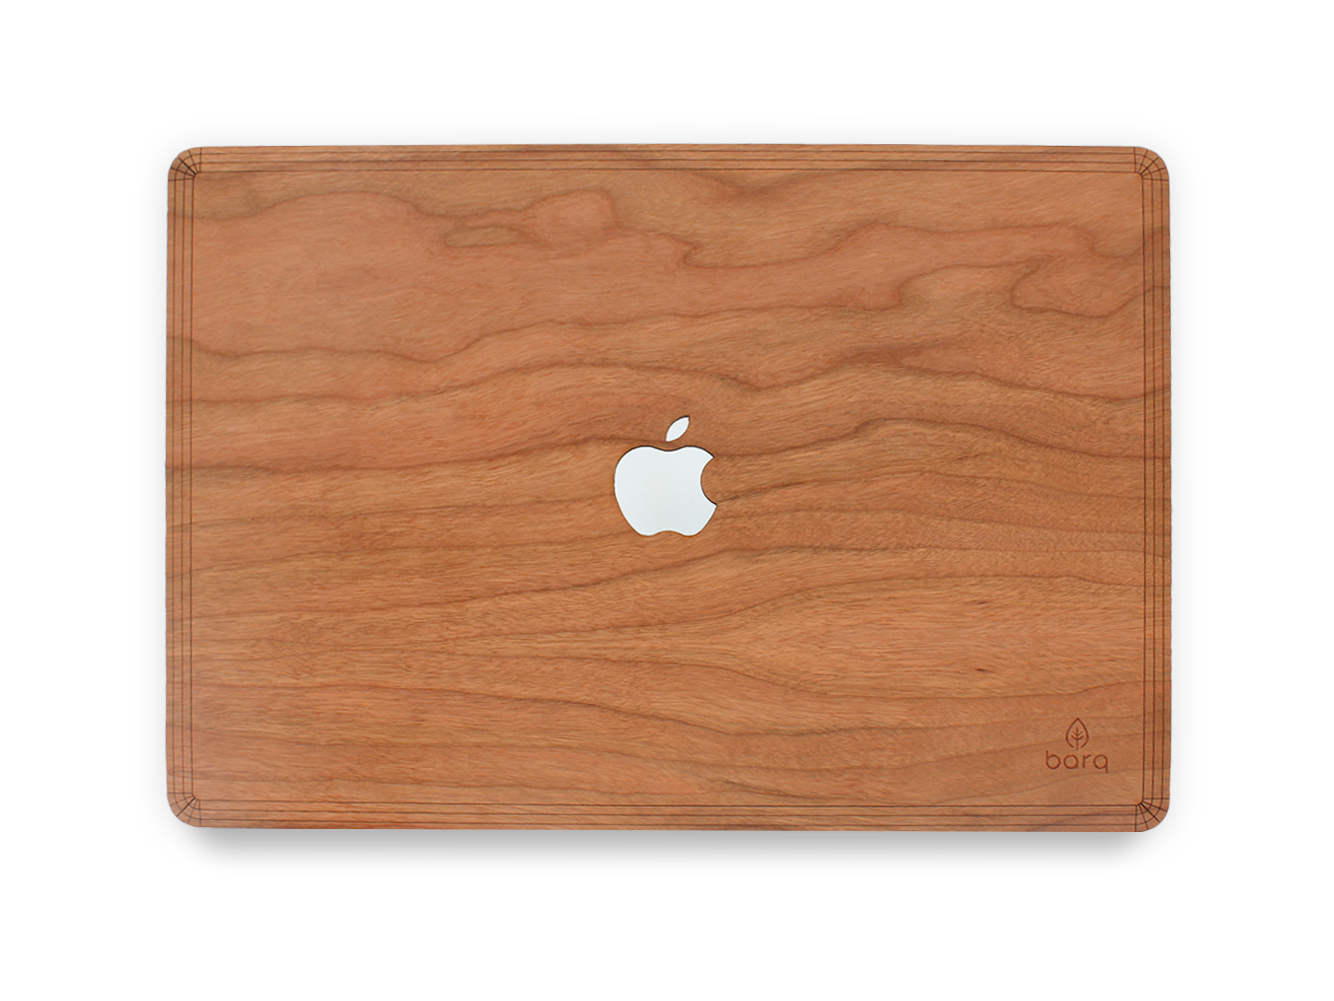 Red Elm - MacBook Skin Made From Real Wood-Barqwood